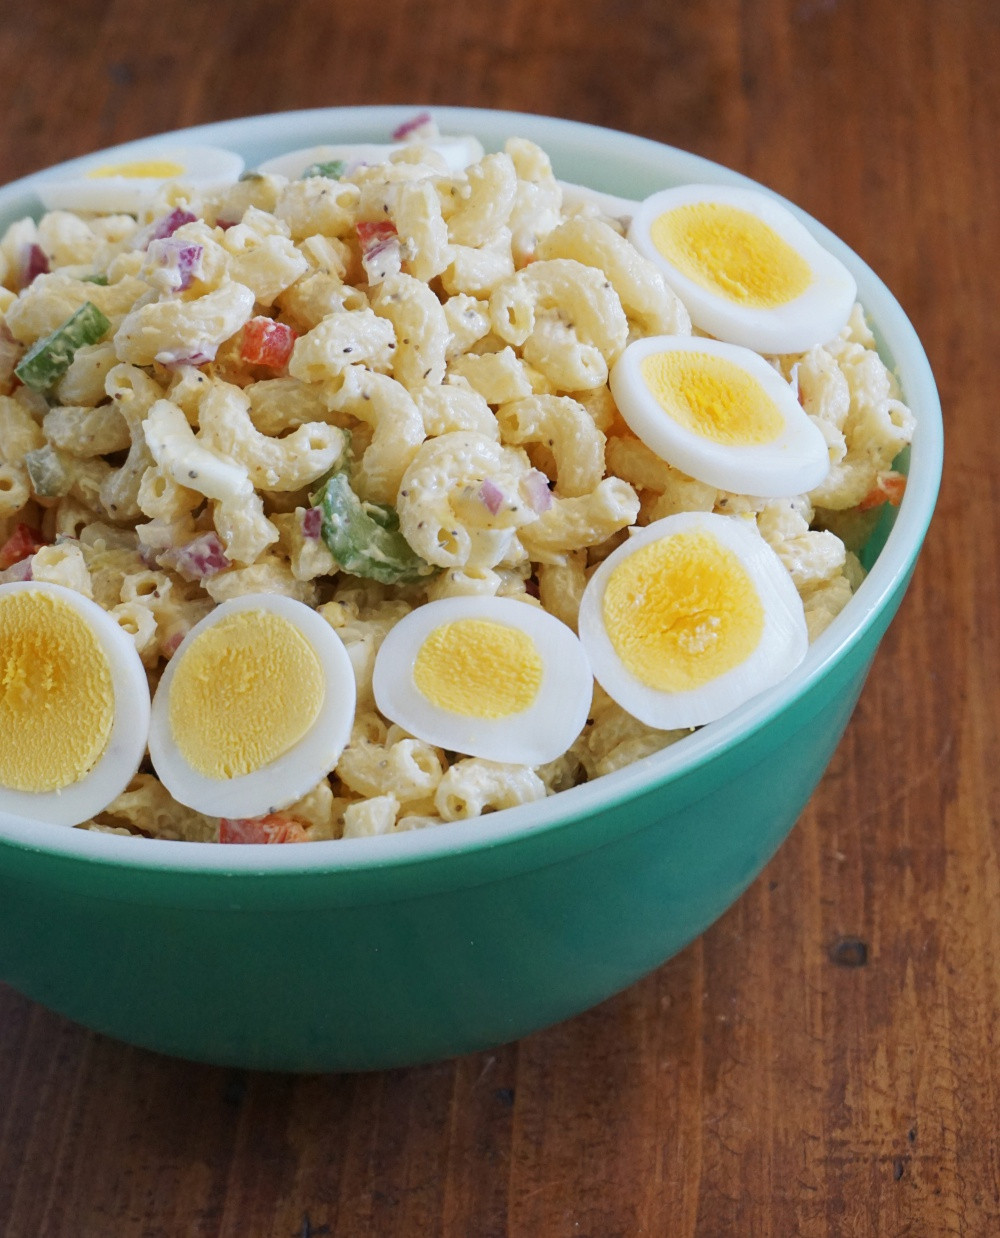 20 Of the Best Ideas for Amish Macaroni Salad Recipe Home, Family